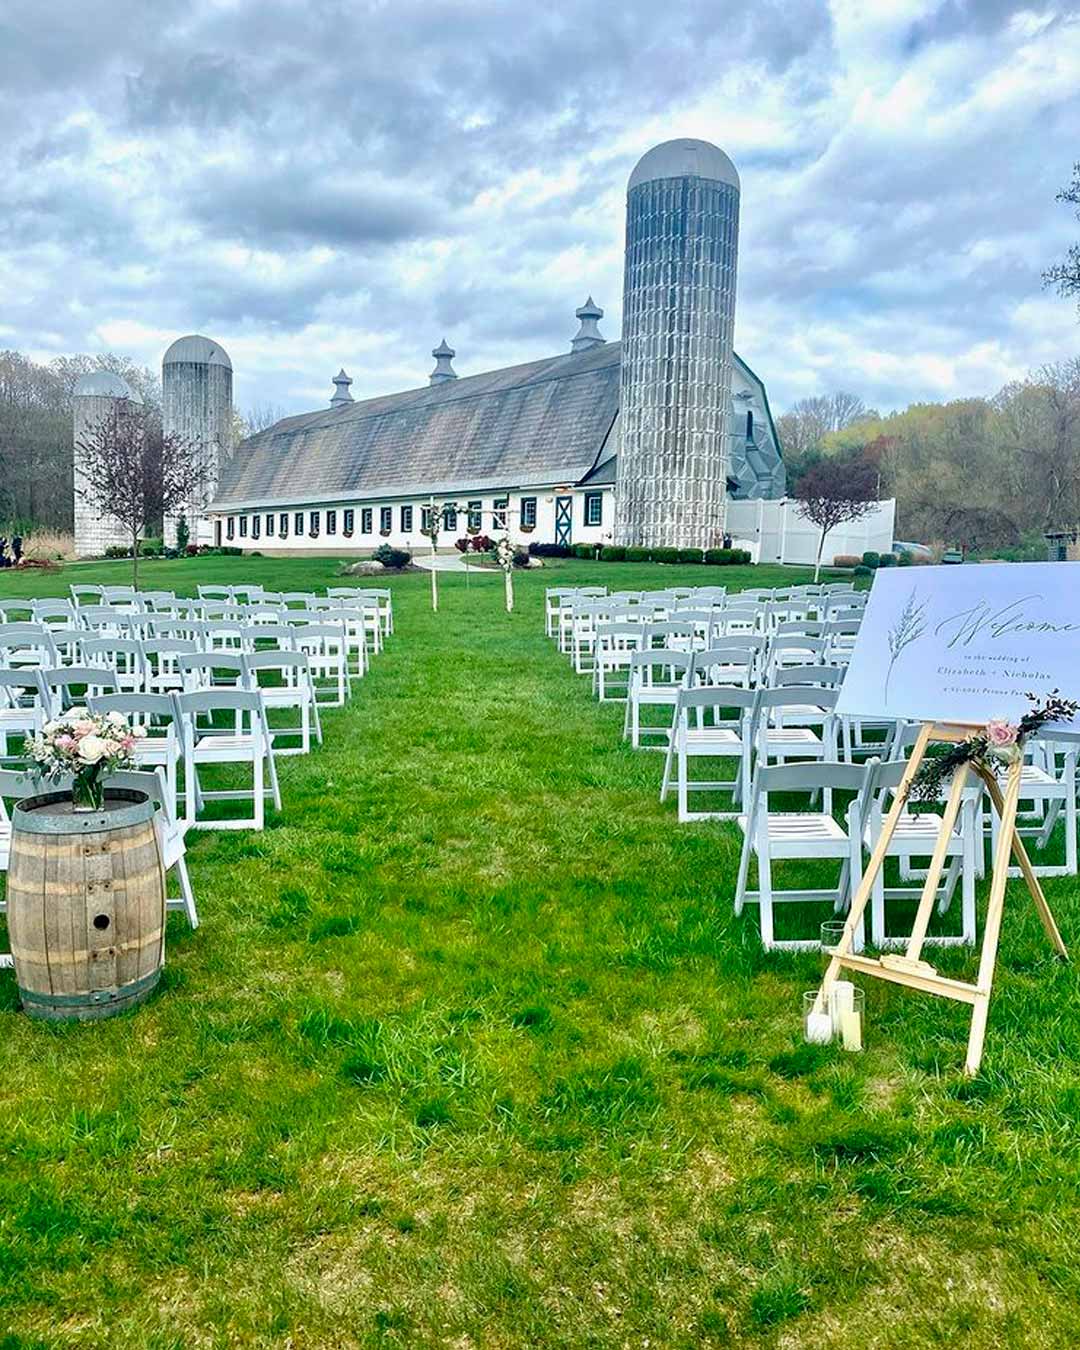 rustic wedding venues in new jersey outdoor aisle